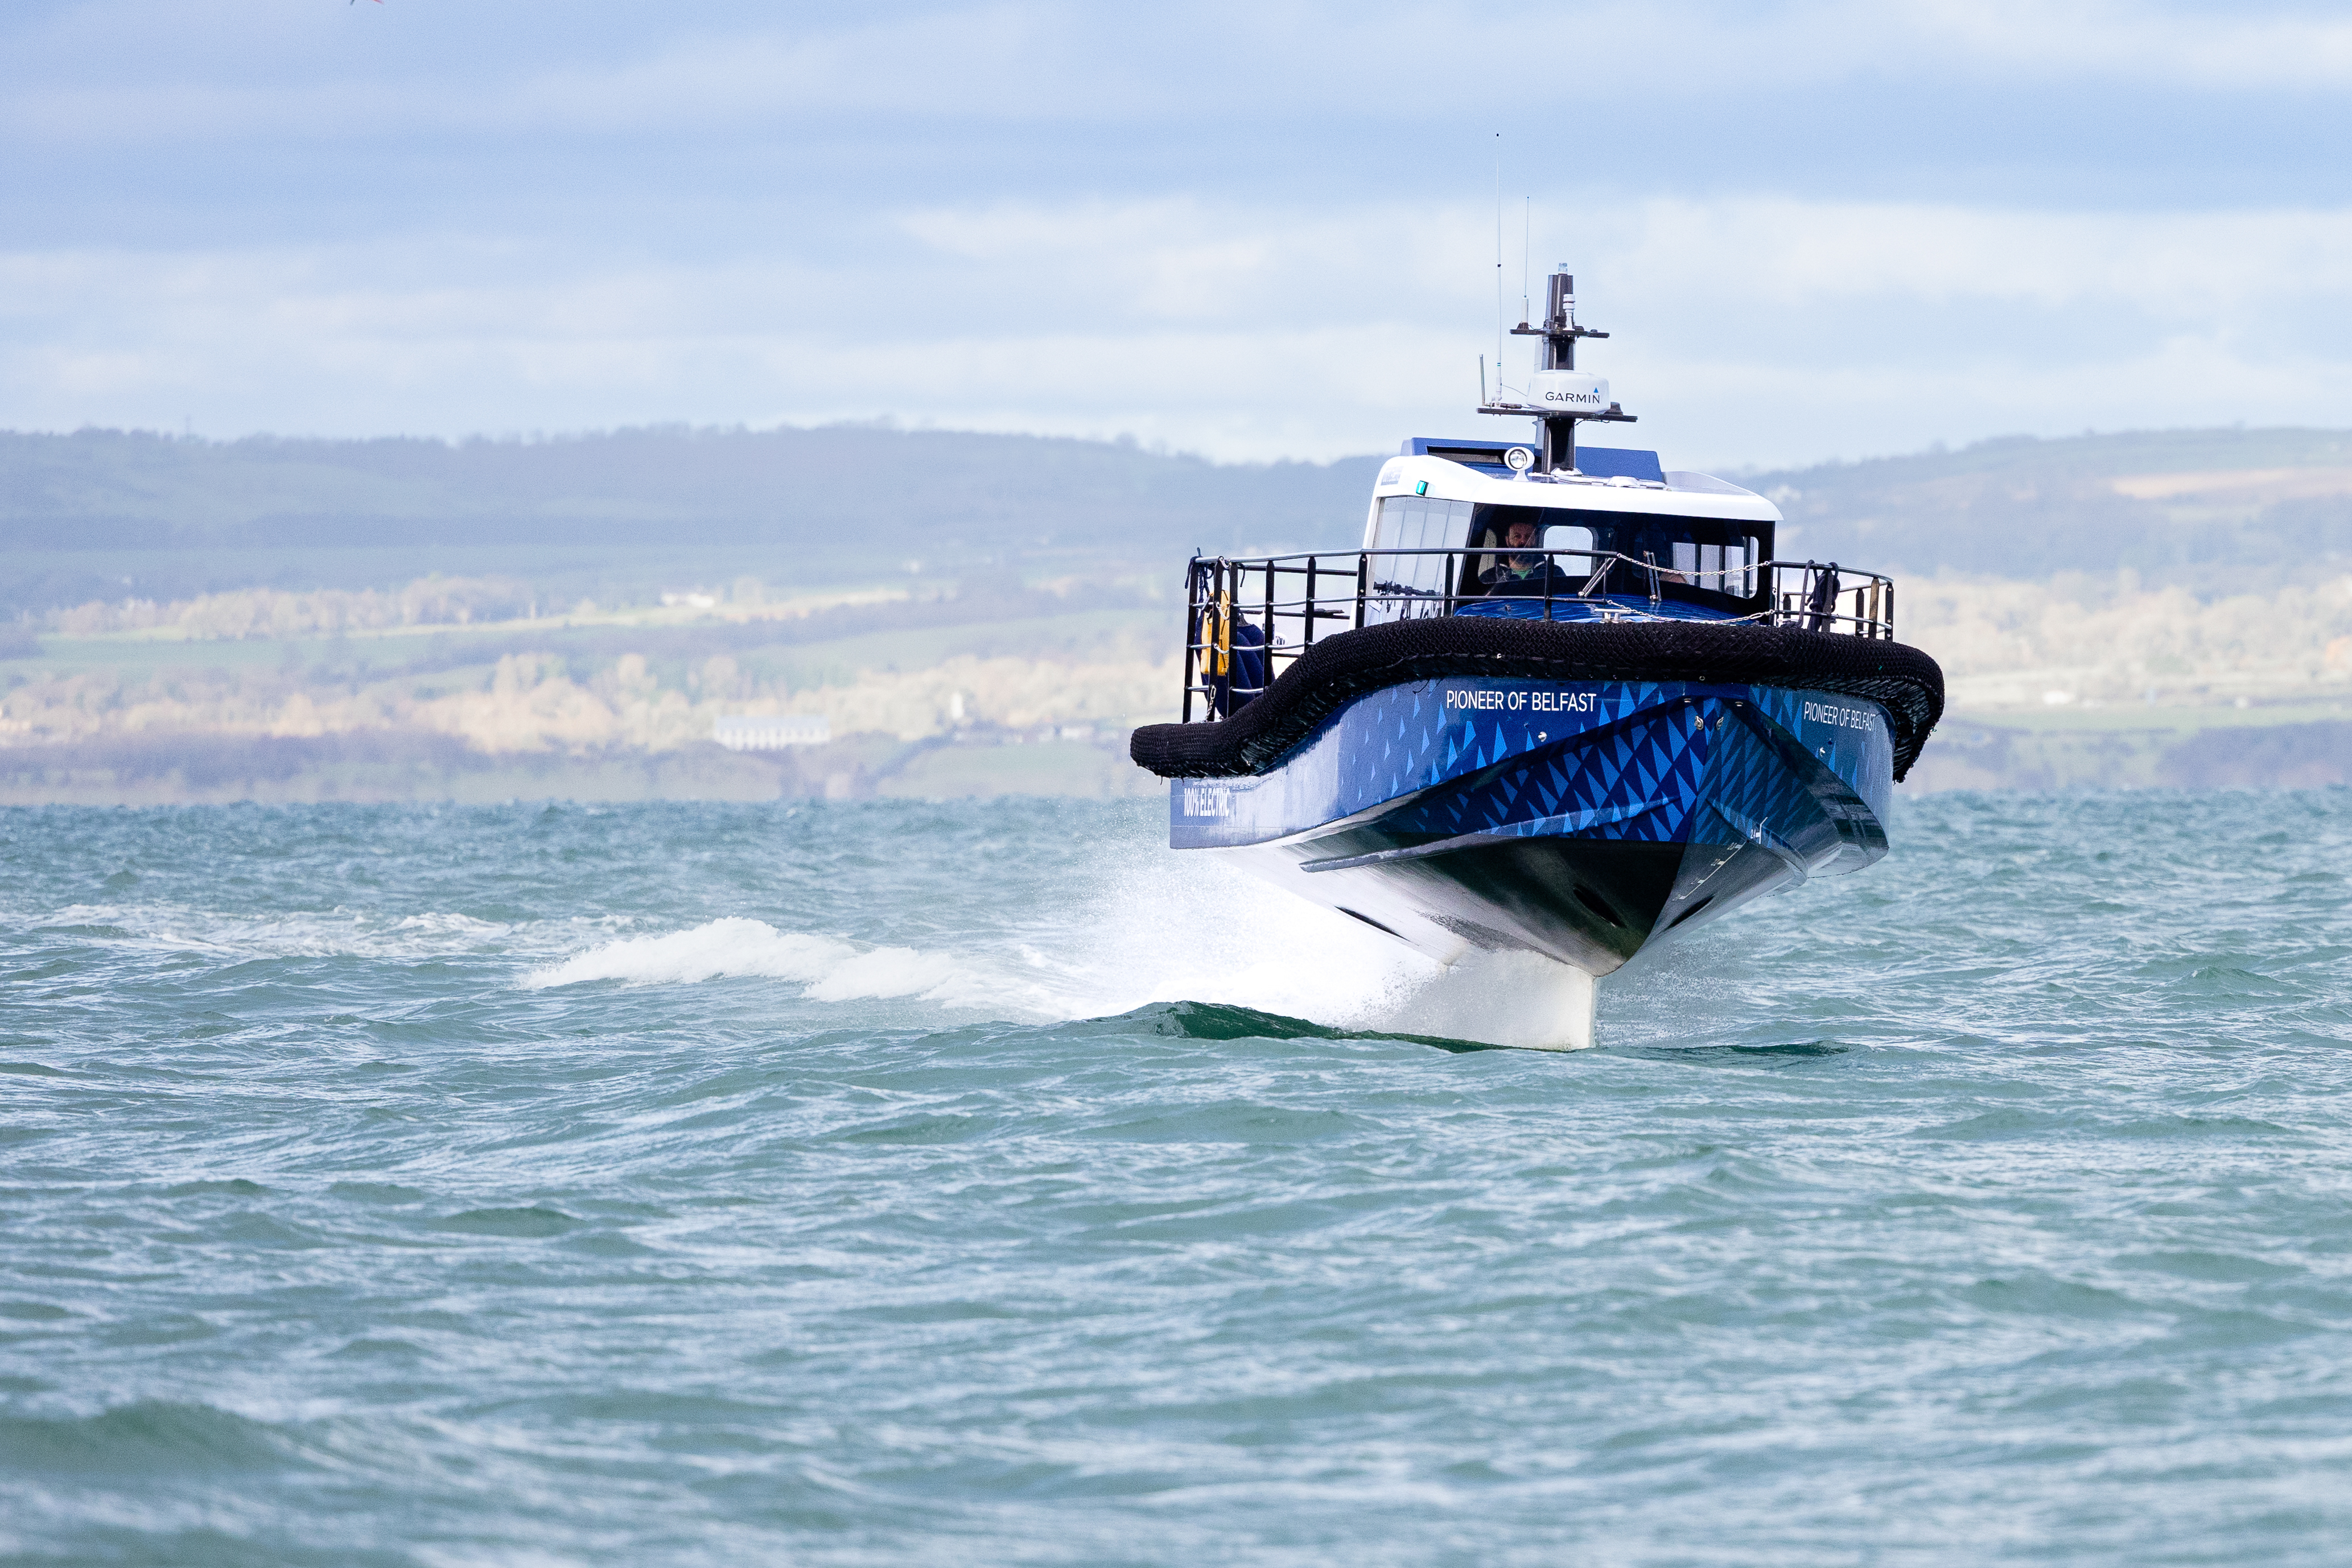 Blue EF-12 Workboat foiling towards the camera with a hill in the background